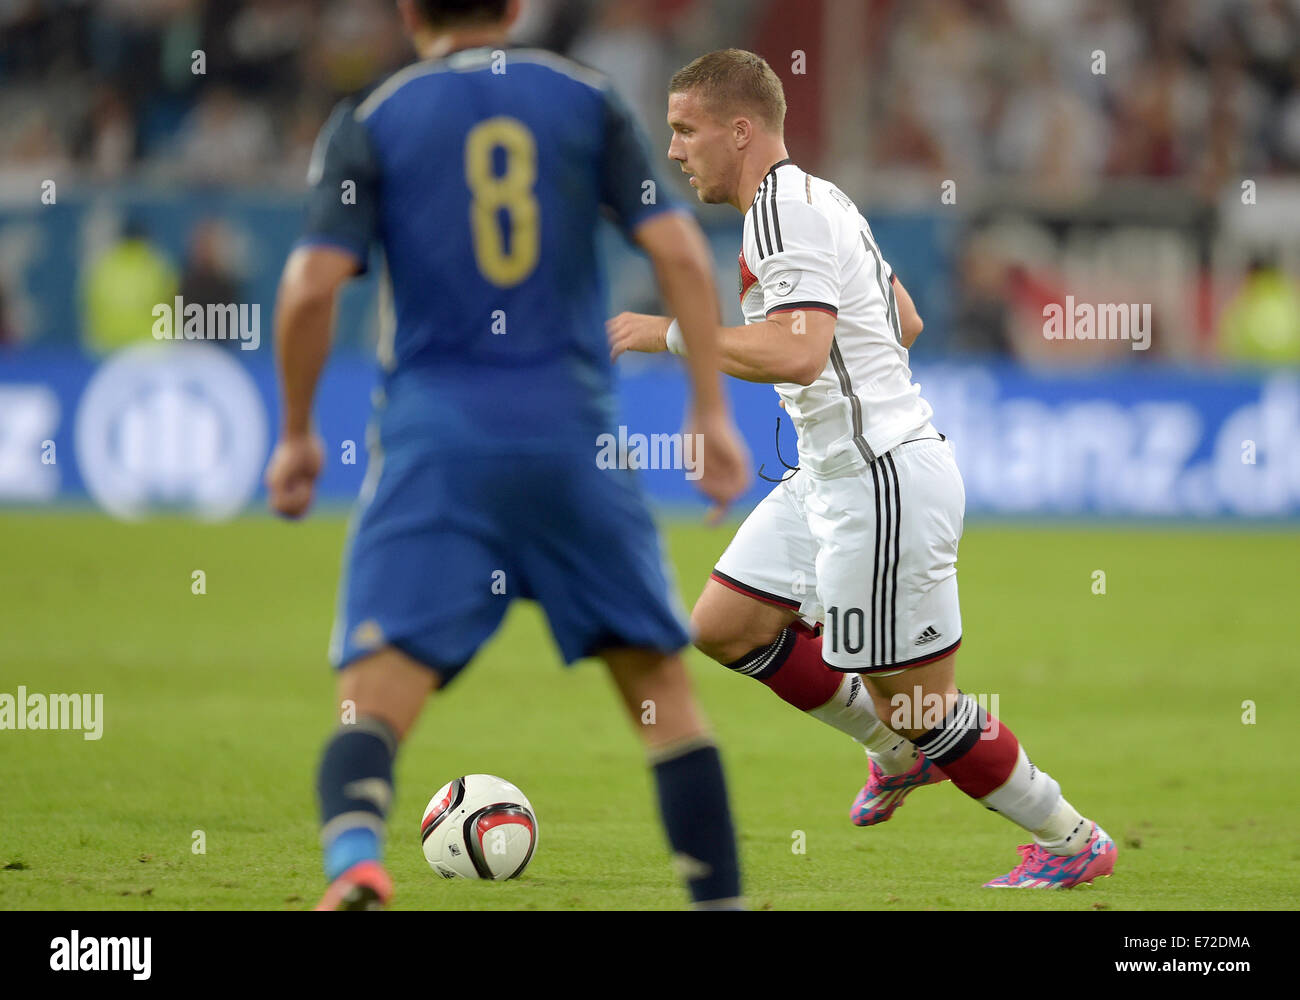 Duesseldorf, Germany. 03rd Sep, 2014. Argentina's Enzo Perez (L) and Germany's Lukas Podolski vie for the ball during the international match between Germany and Argentina at Esprit Arena in Duesseldorf, Germany, 03 September 2014. Photo: Federico Gambarini/dpa/Alamy Live News Stock Photo